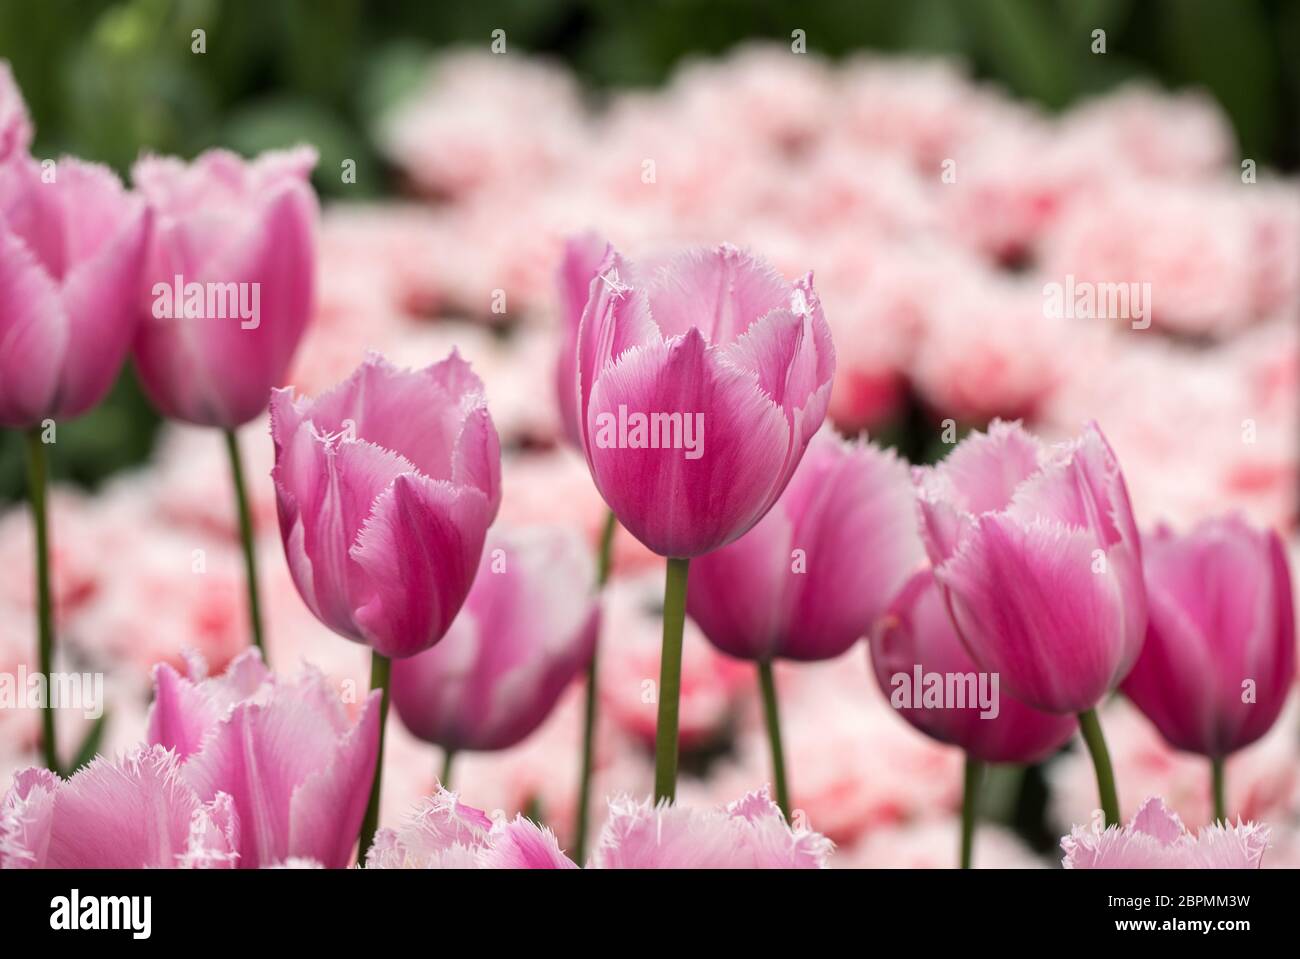 pink tulips flowers blooming in a garden Stock Photo